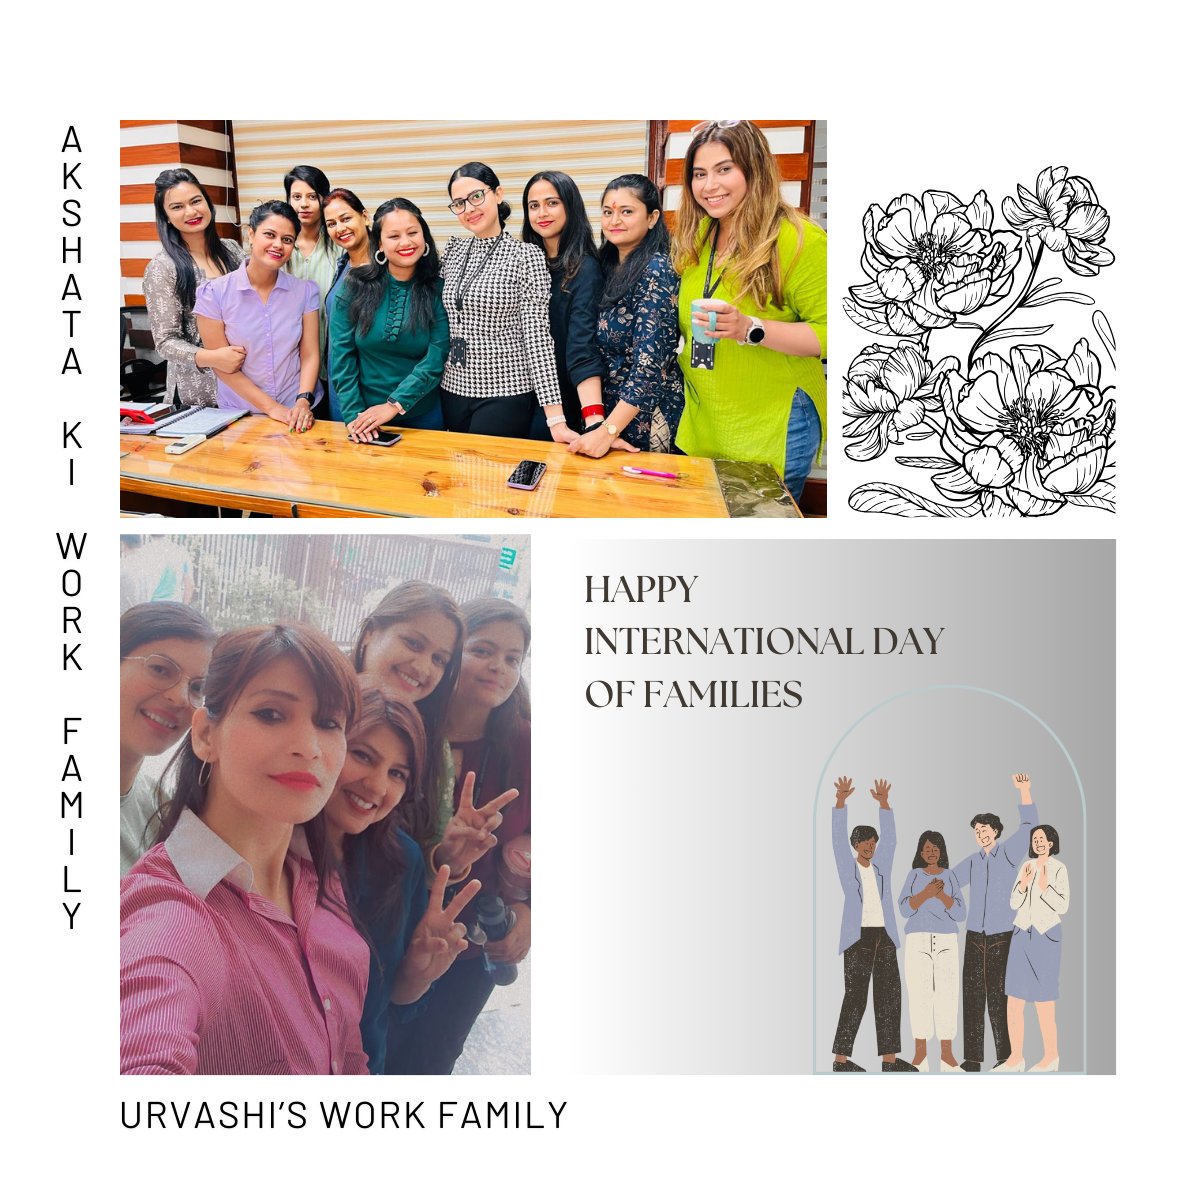 A #HappyInternationalDayofFamilies from @Evontech and @gamesdevteam! We hope you all have someone who feels like 'family at work'. Today, let your 'work family' know what they mean to you. Meanwhile, enjoy some 'family photos' sent in by our colleagues. 

#WorkFamily #FamilyTime